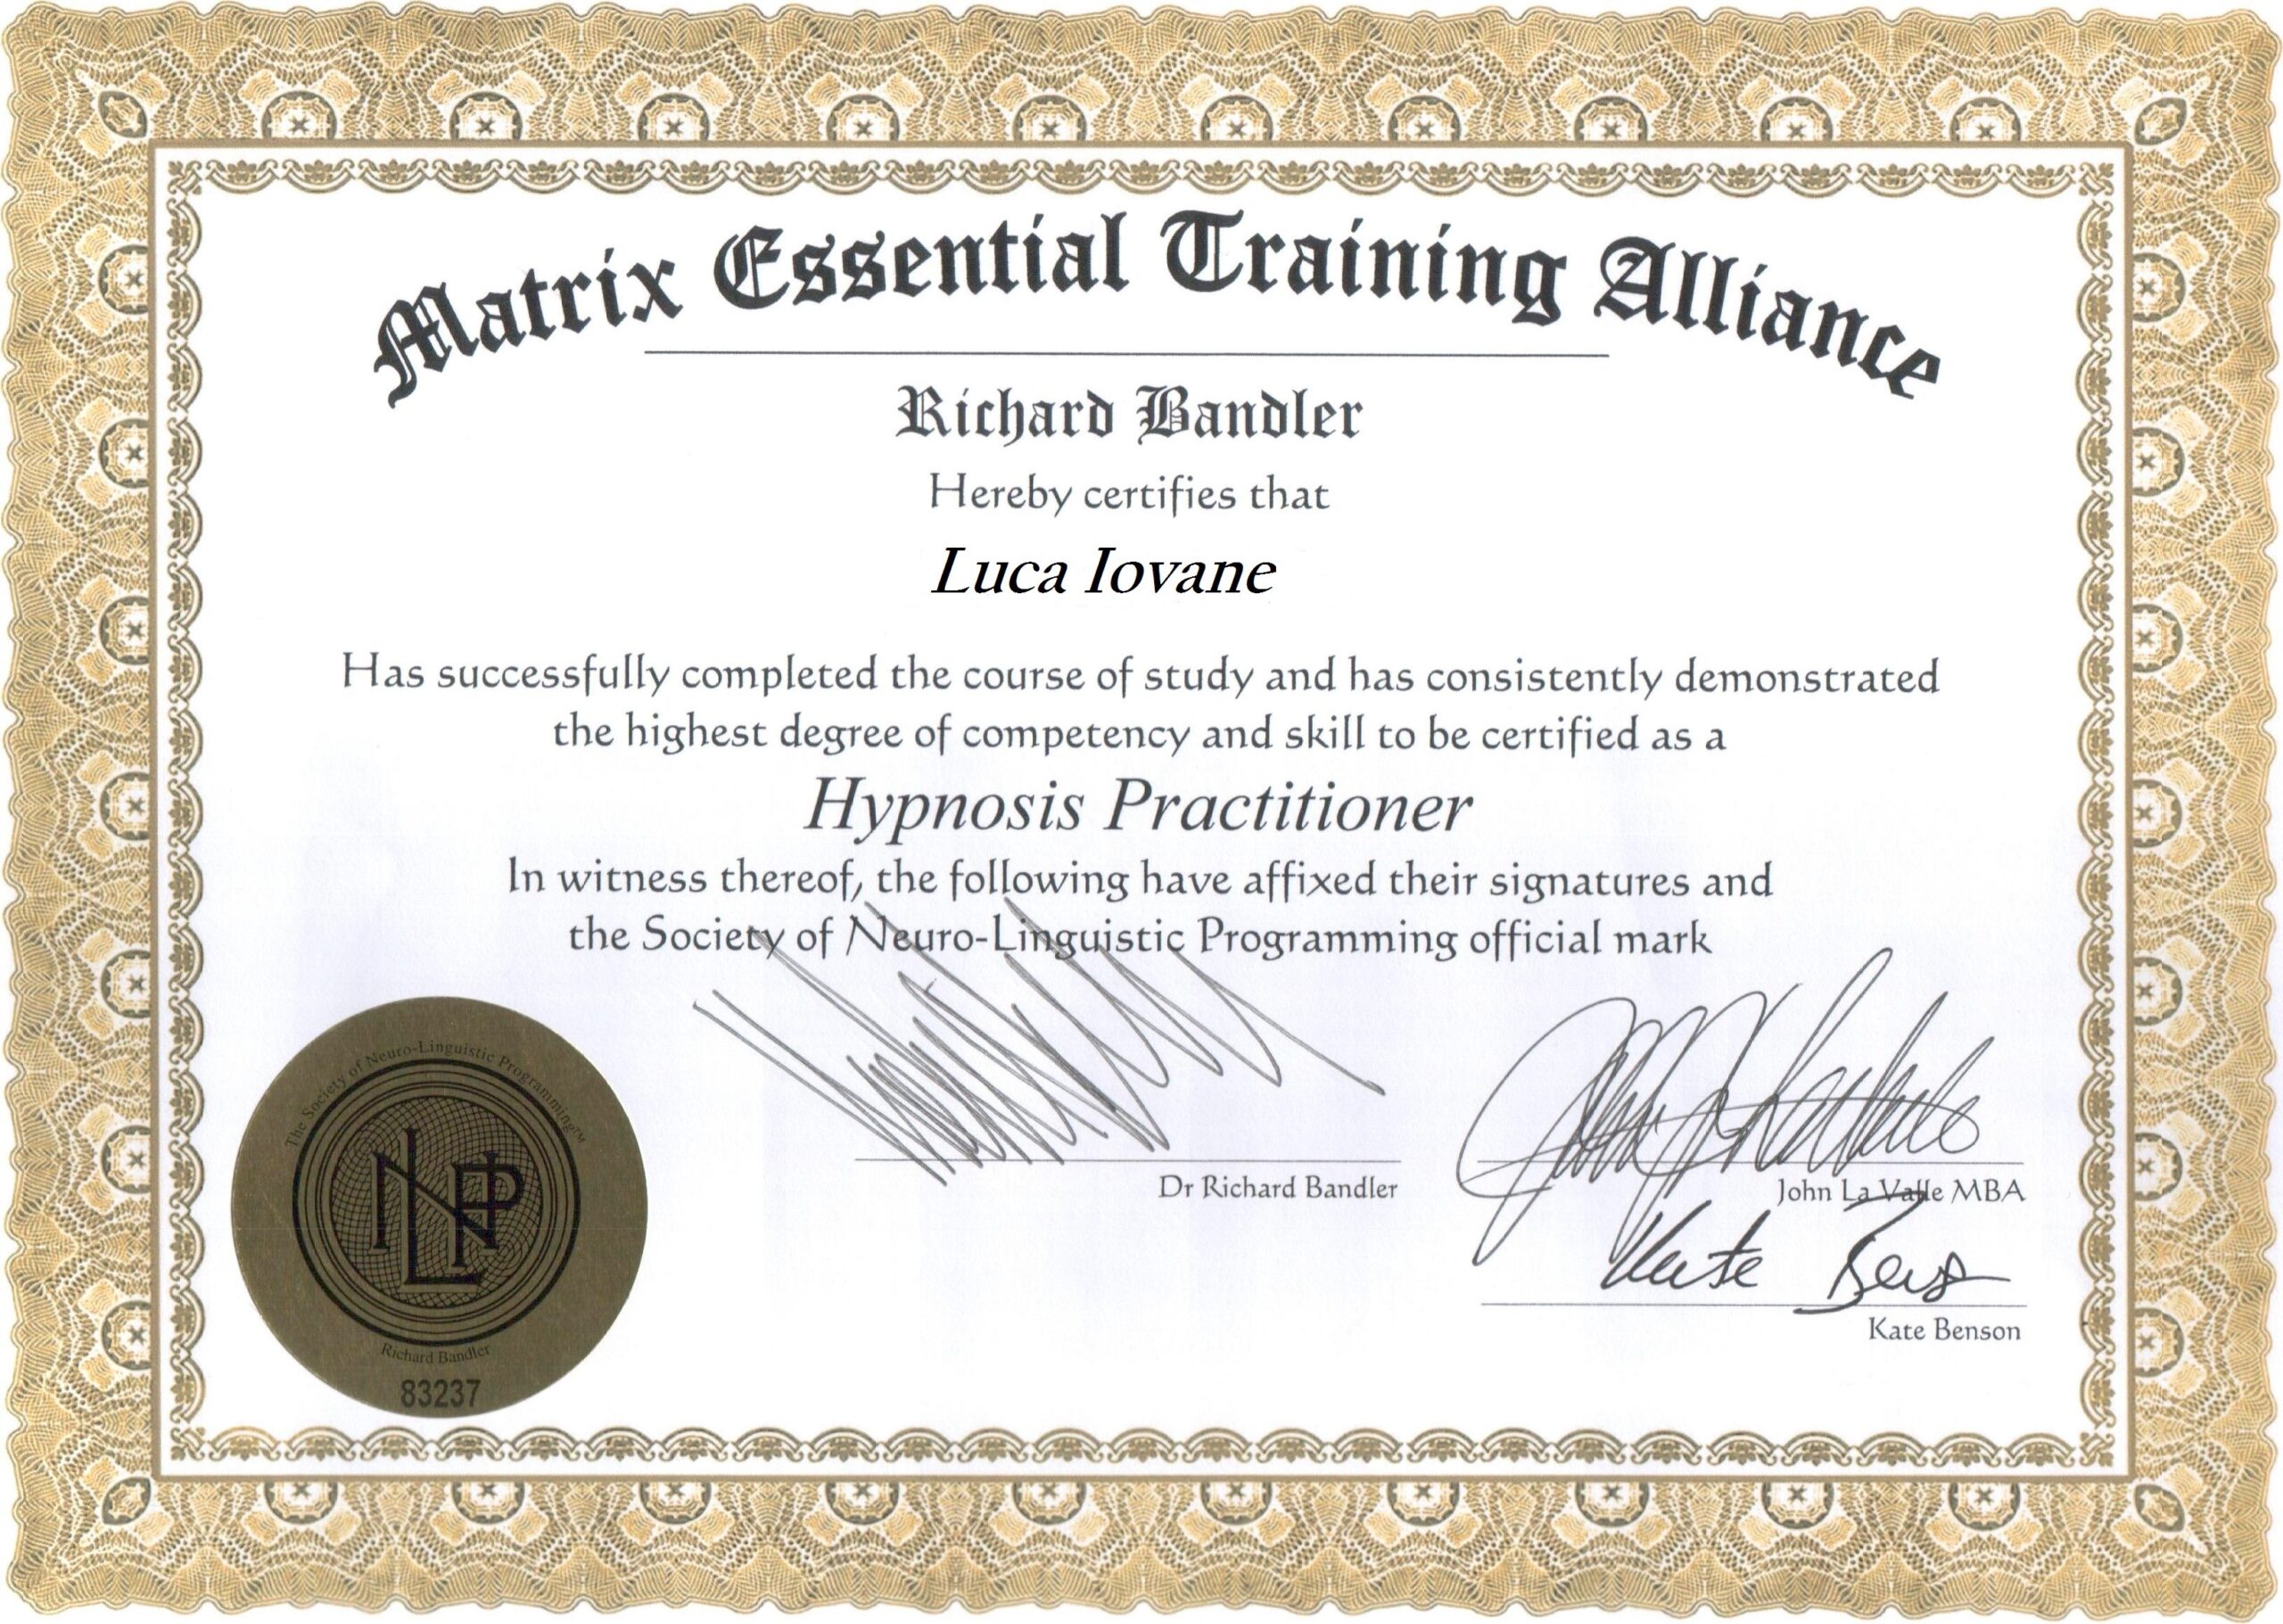 Hypnosis Practitioner